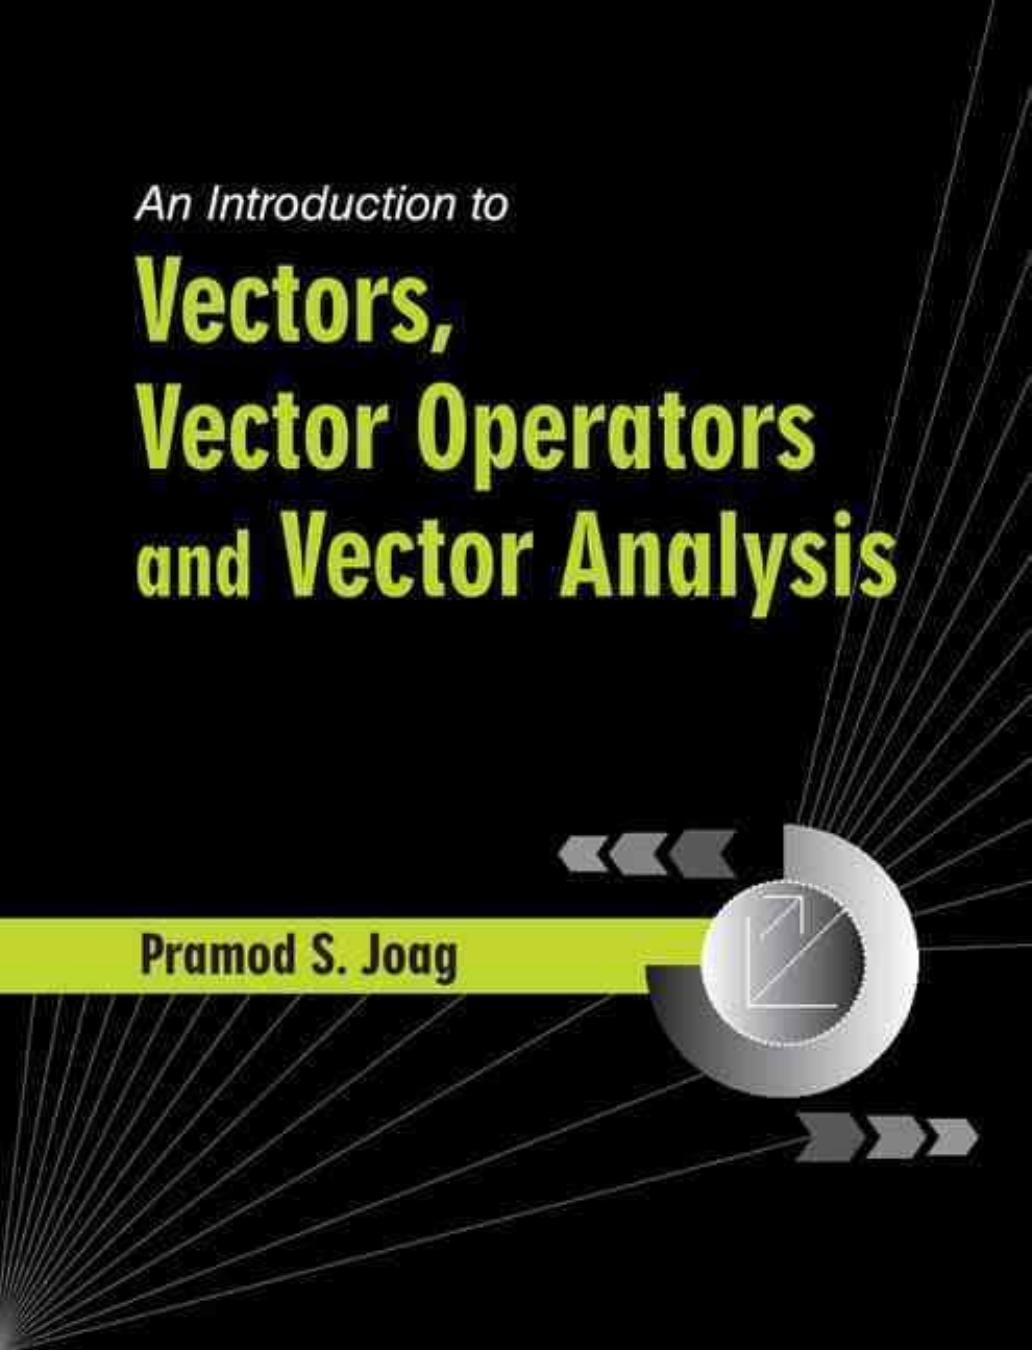 An Introduction to Vectors, Vector Operators and Vector Analysis, 2016